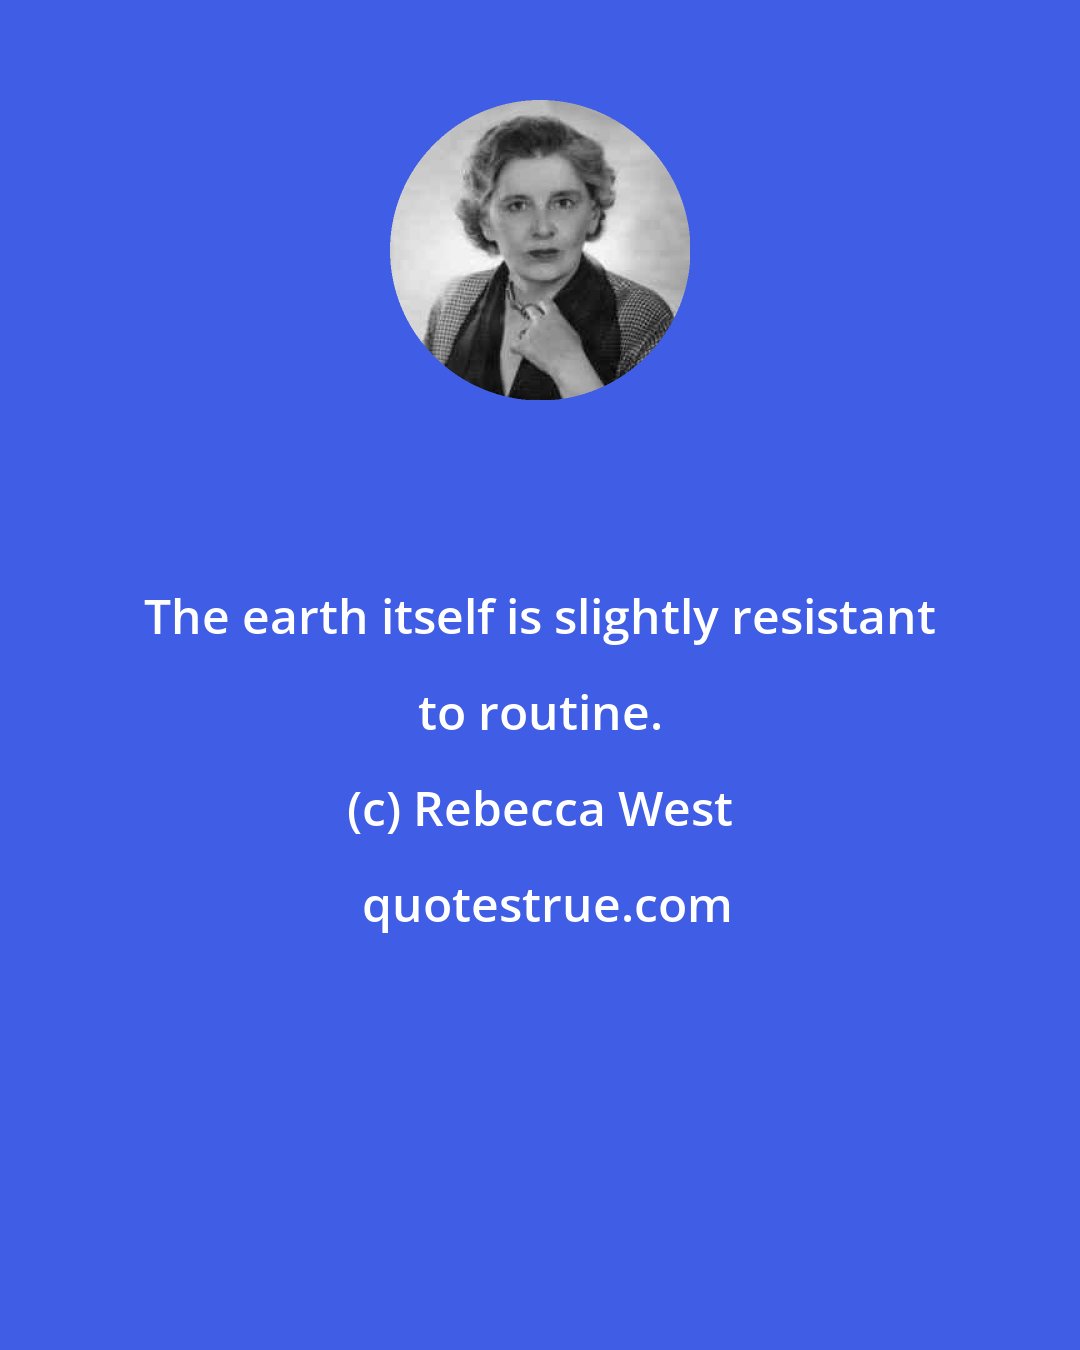 Rebecca West: The earth itself is slightly resistant to routine.